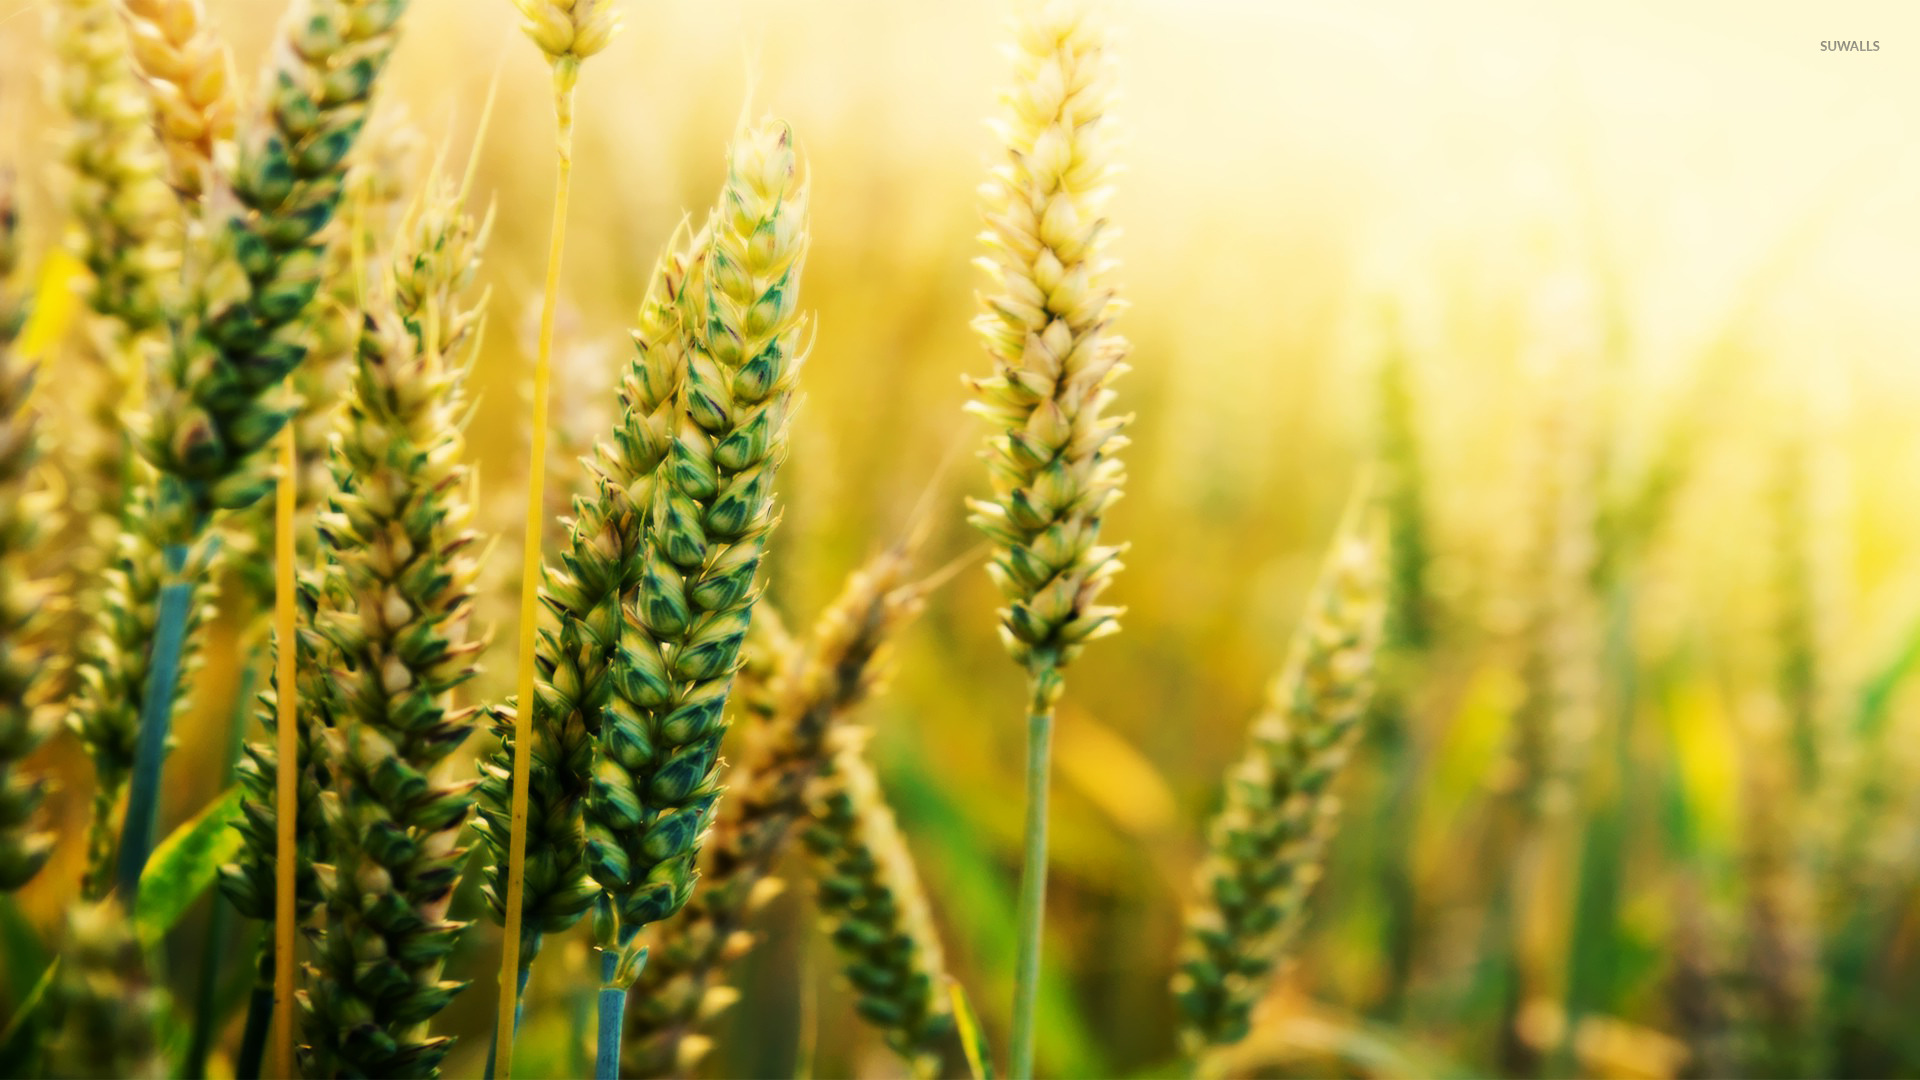 Wheat wallpaper - Photography wallpapers - #20719